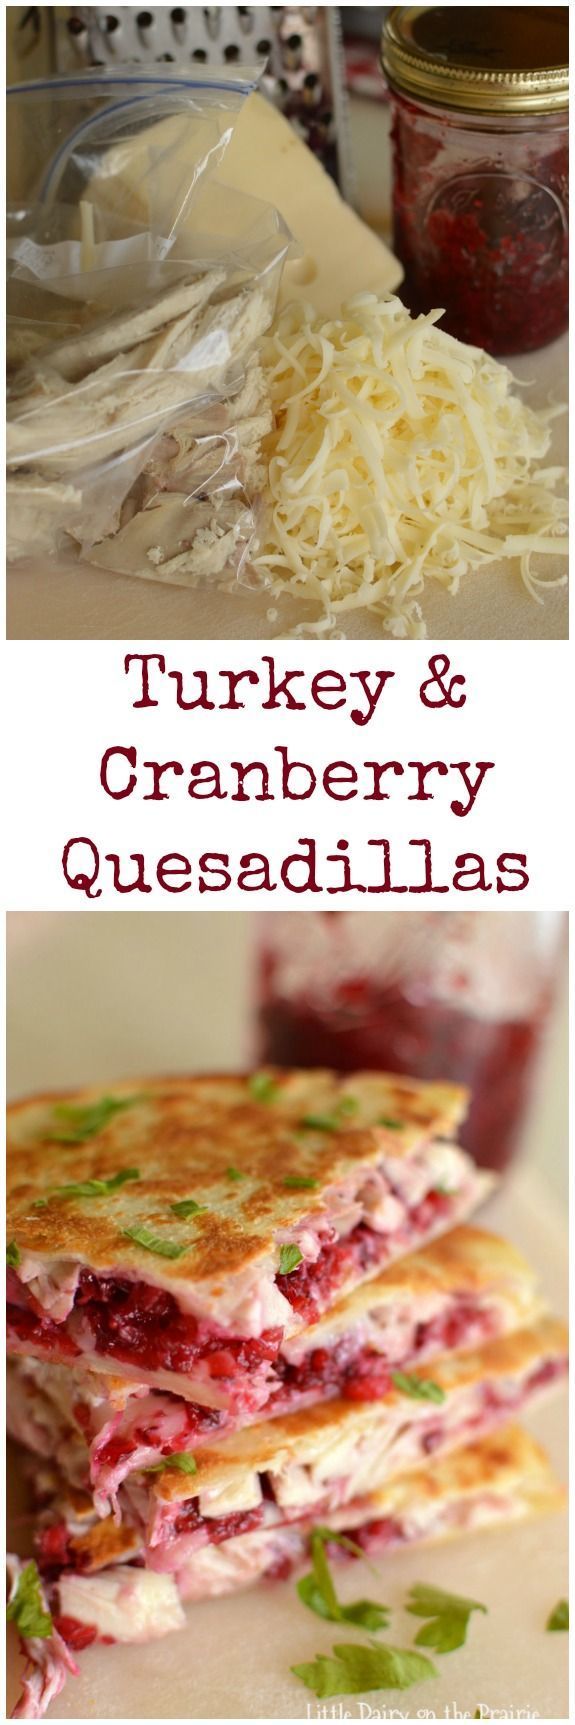 Turkey and Cranberry Quesadillas are quick and easy way to use up leftover turkey. Trust me, no complaints about leftovers on this